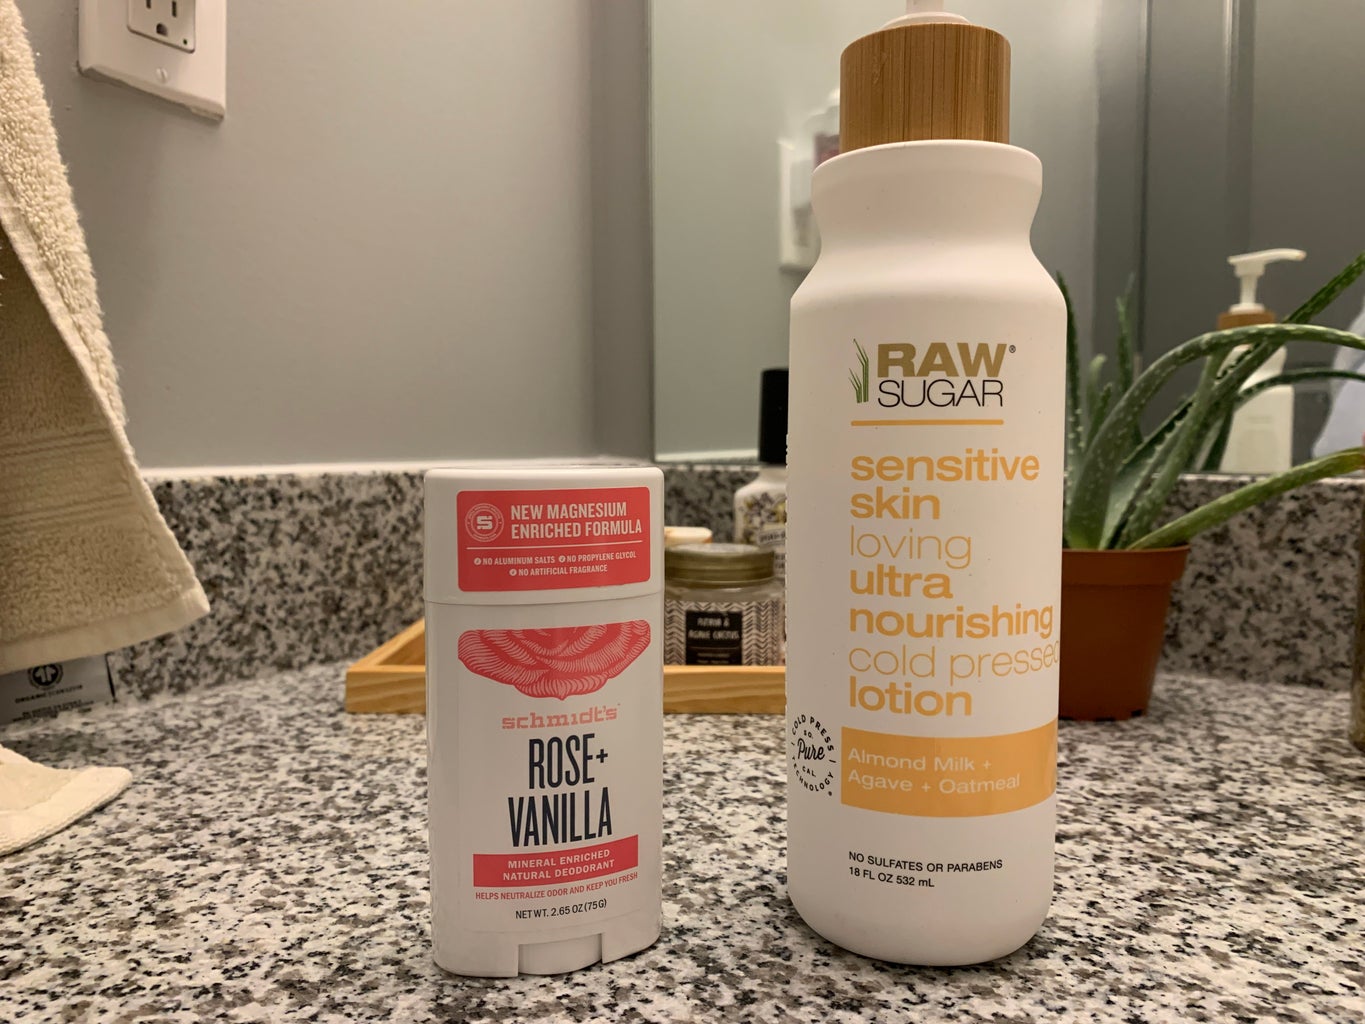 Deodorant and lotion bottles on bathroom counter